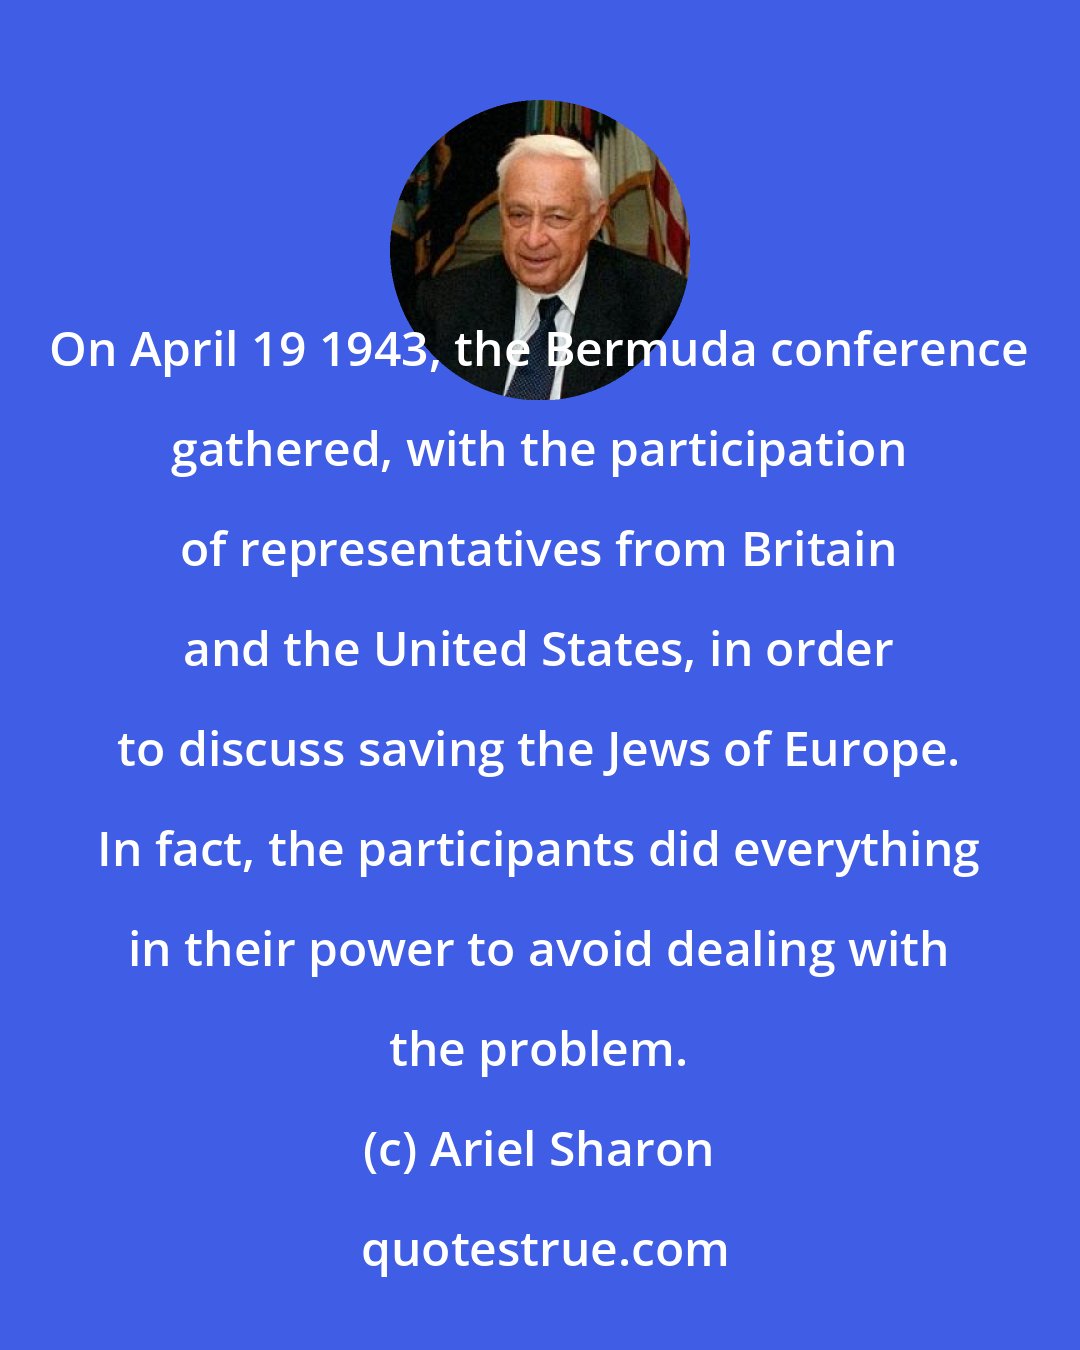 Ariel Sharon: On April 19 1943, the Bermuda conference gathered, with the participation of representatives from Britain and the United States, in order to discuss saving the Jews of Europe. In fact, the participants did everything in their power to avoid dealing with the problem.